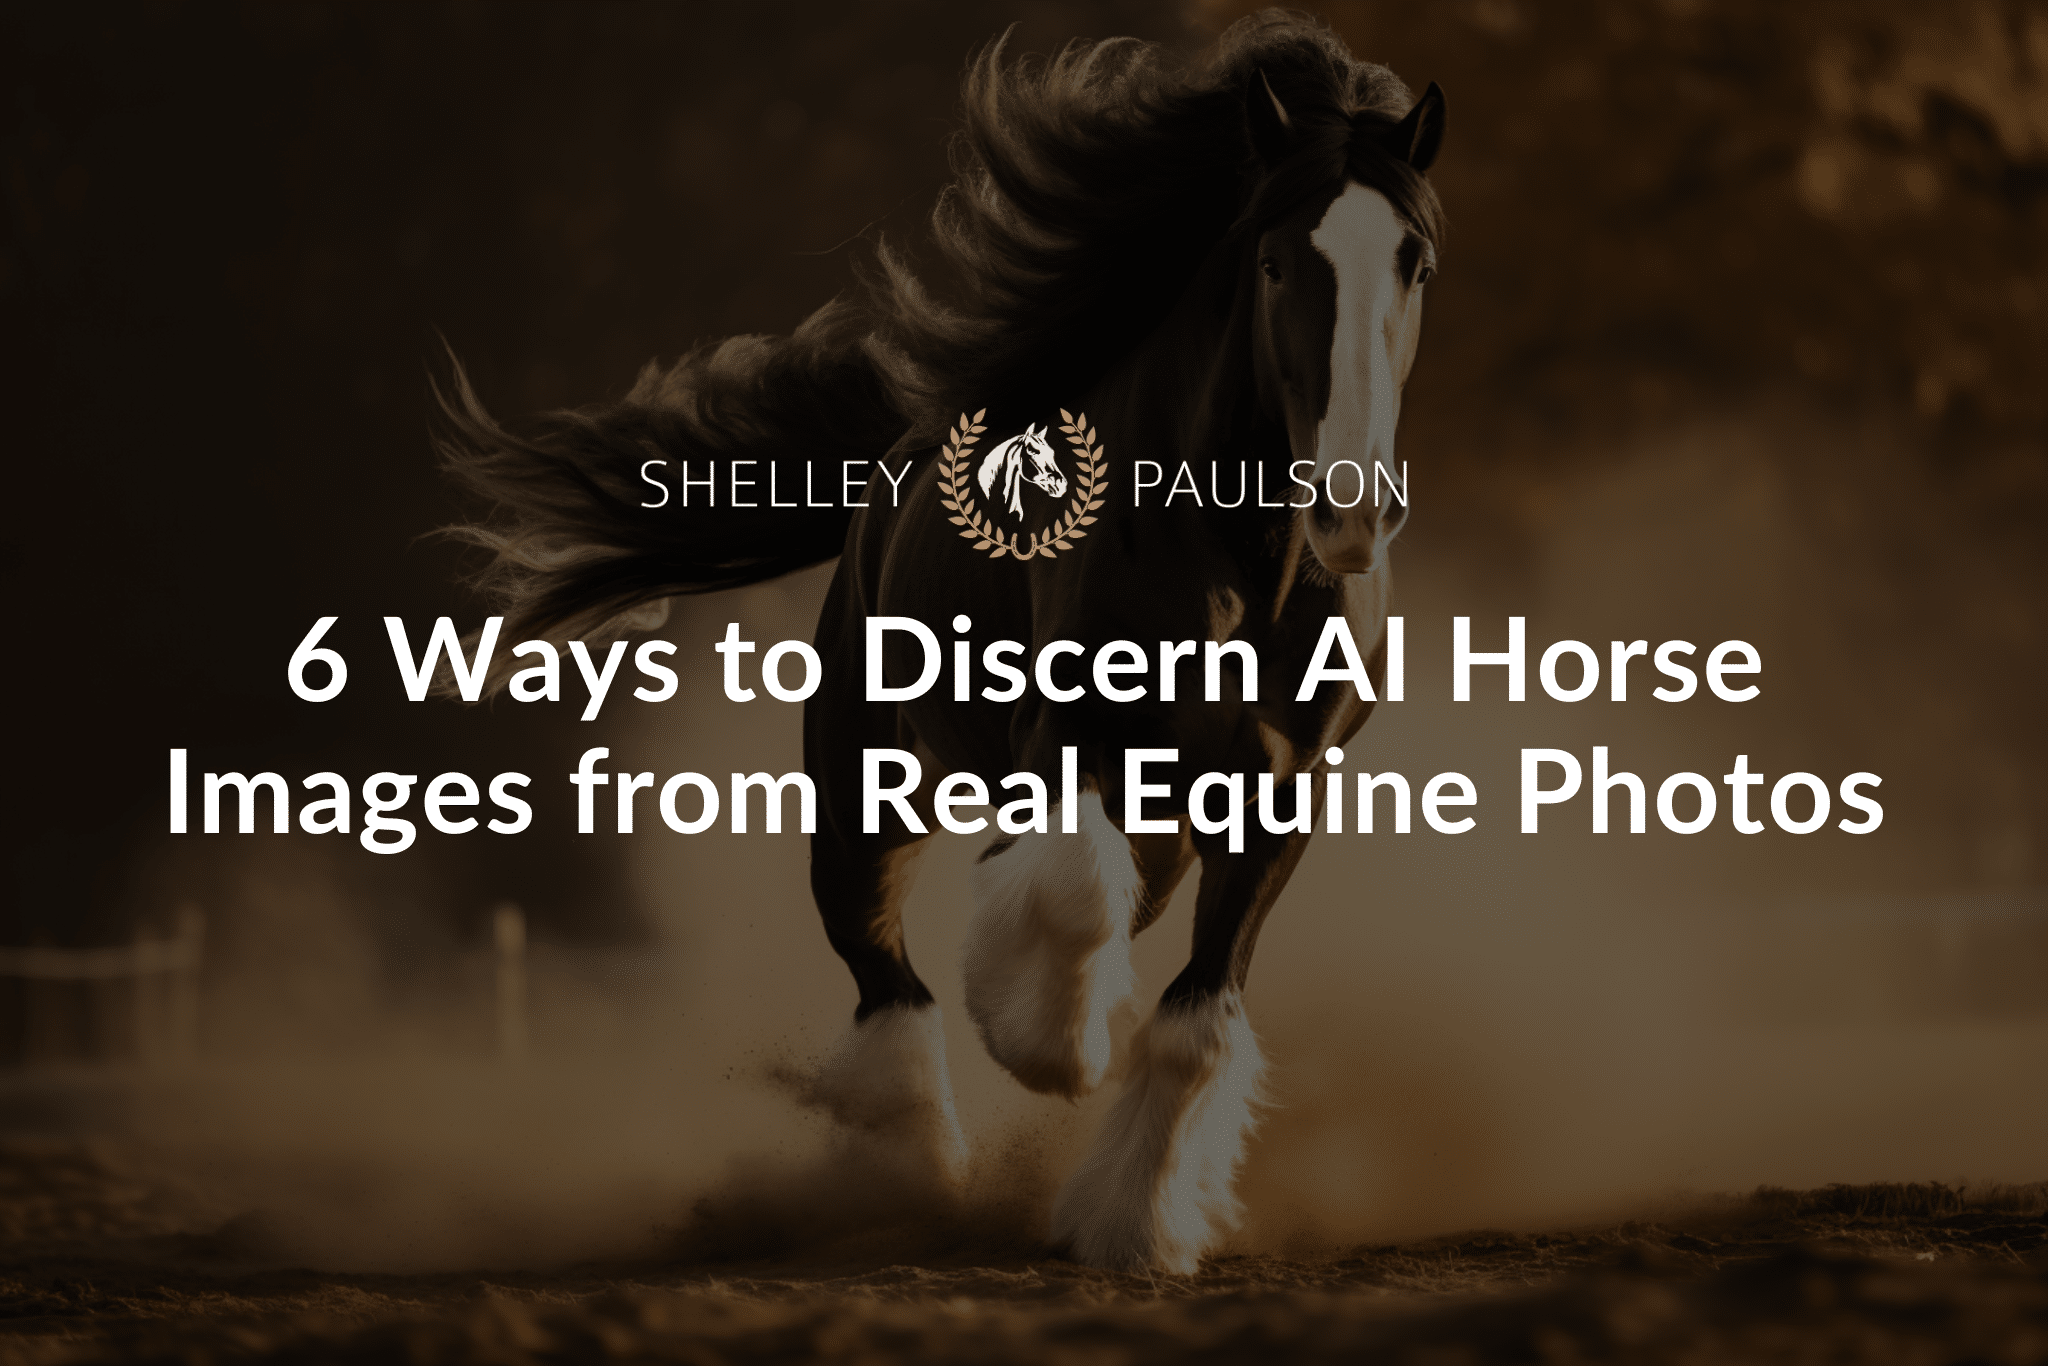 6 Ways to Discern AI Horse Images from Real Equine Photos